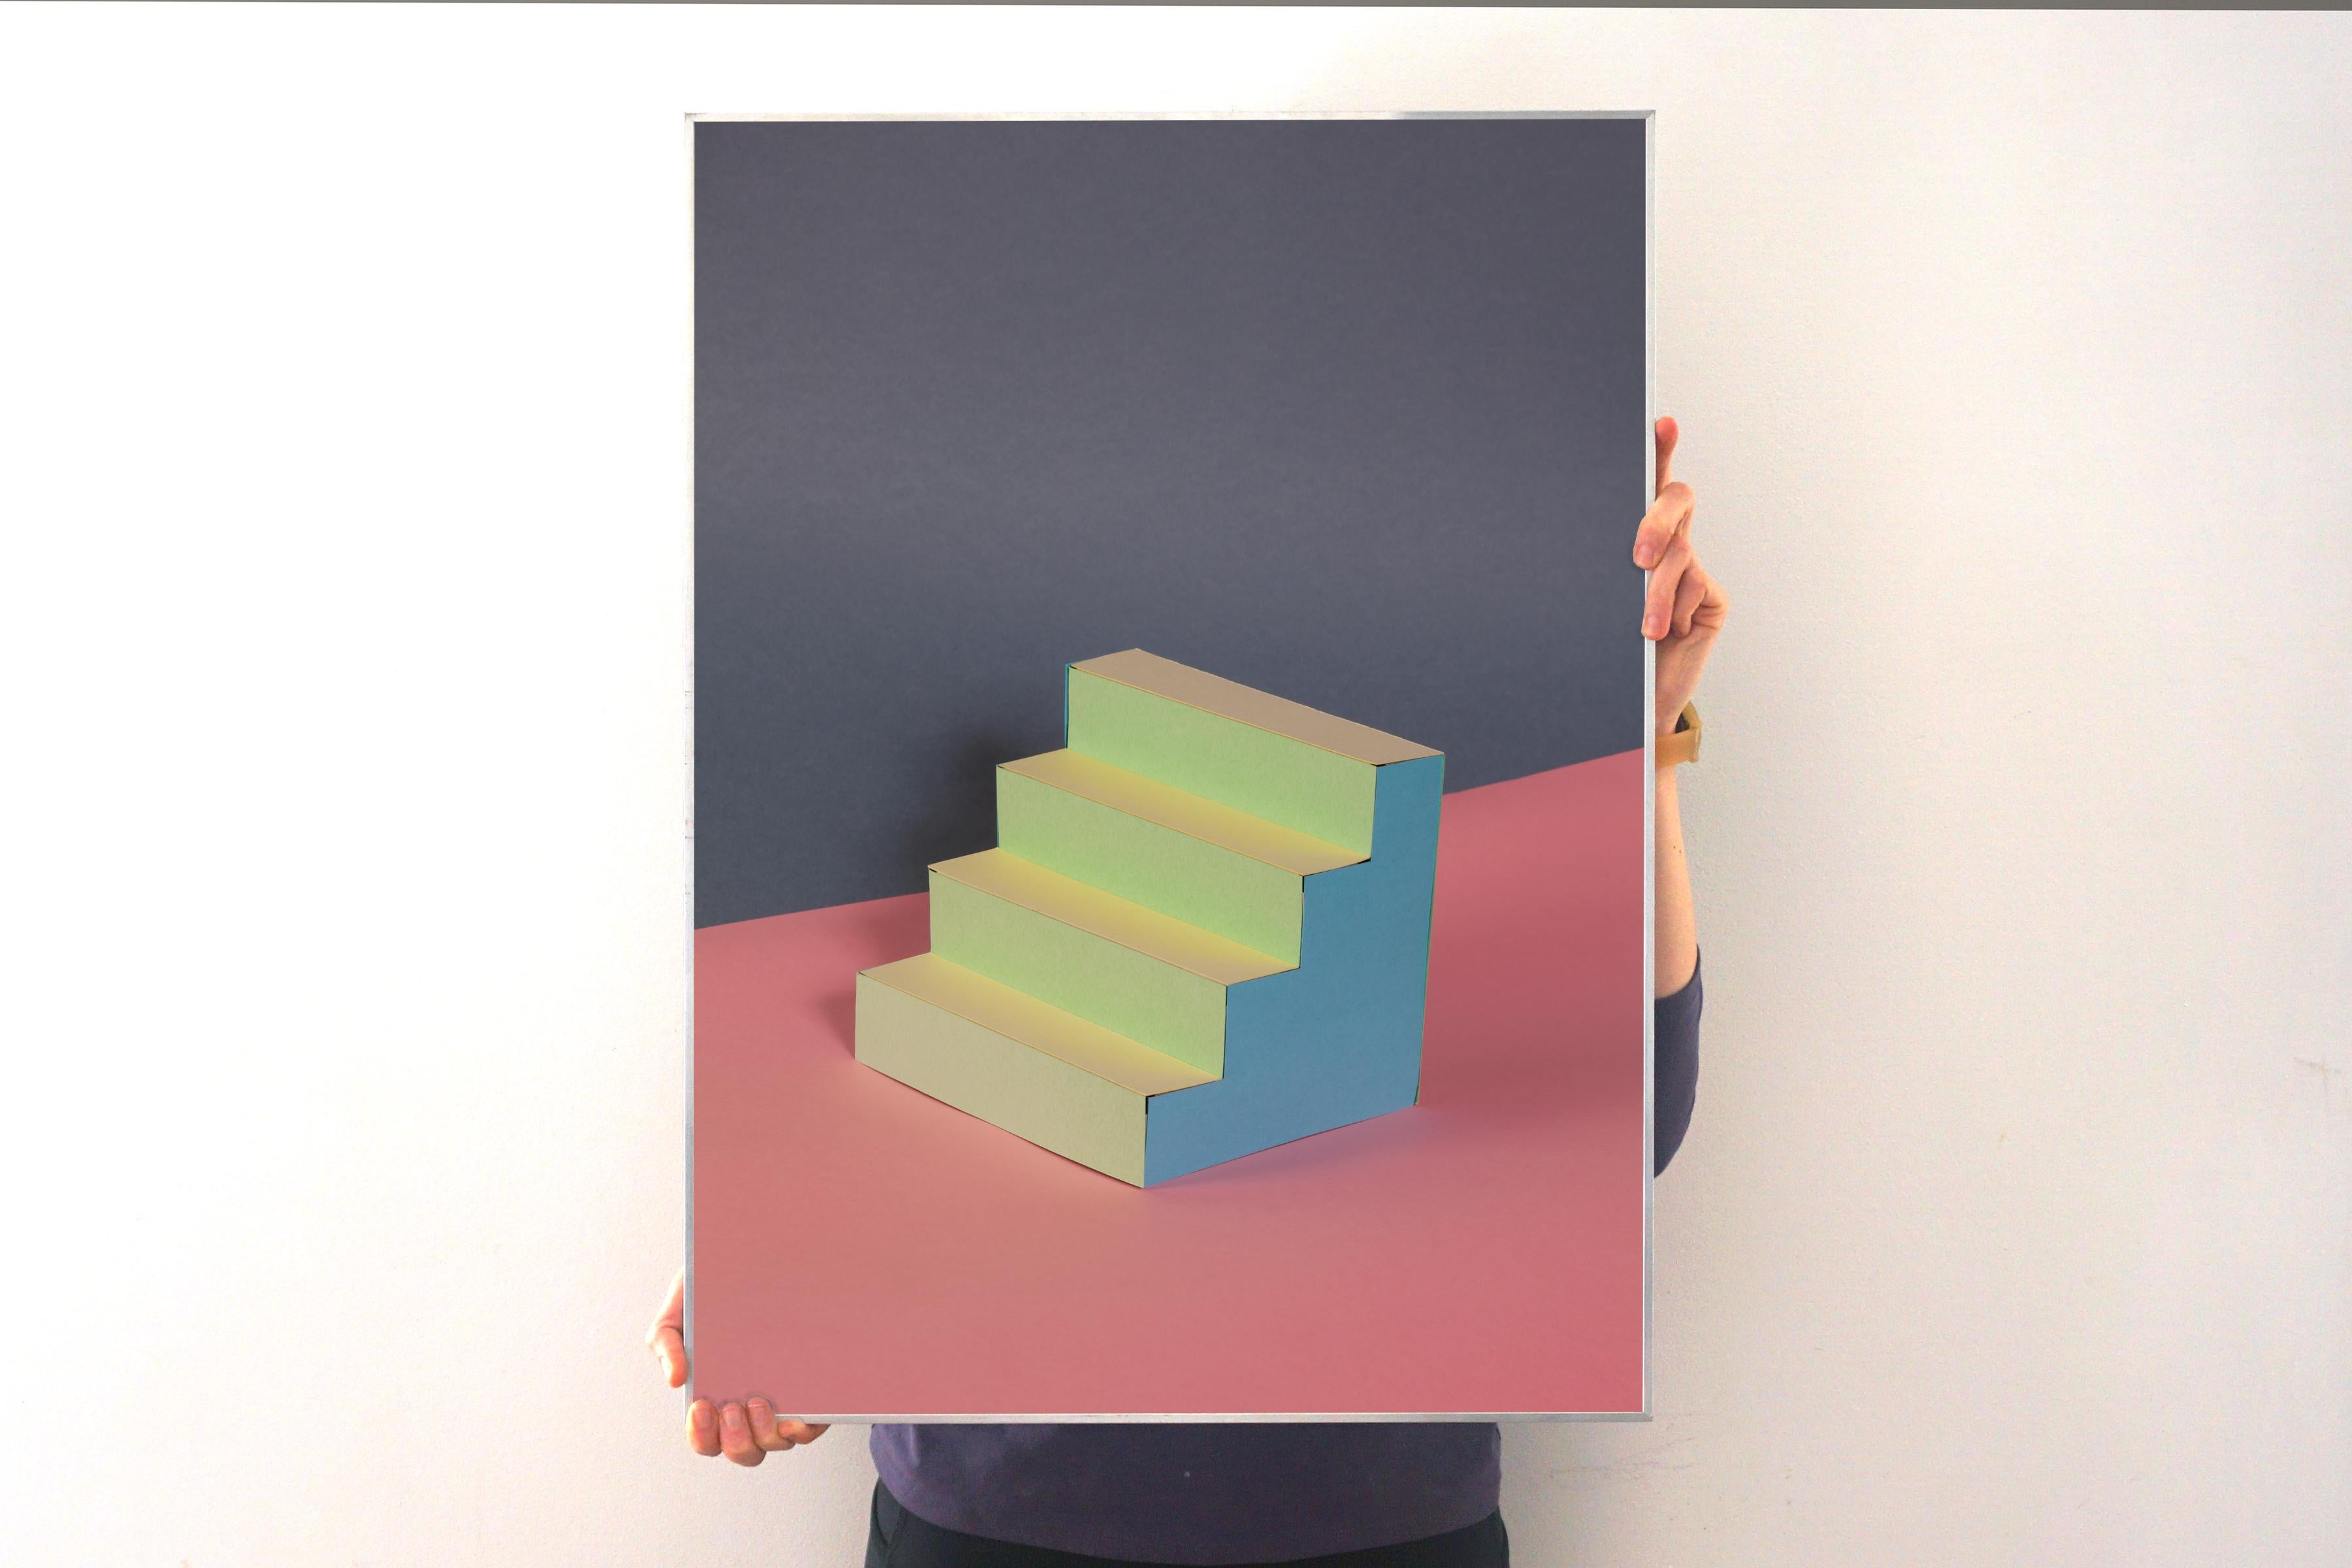 Naif Architecture in Pastel Palette, Contemporary Stairs, Sol Lewitt Style - Print by Ryan Rivadeneyra